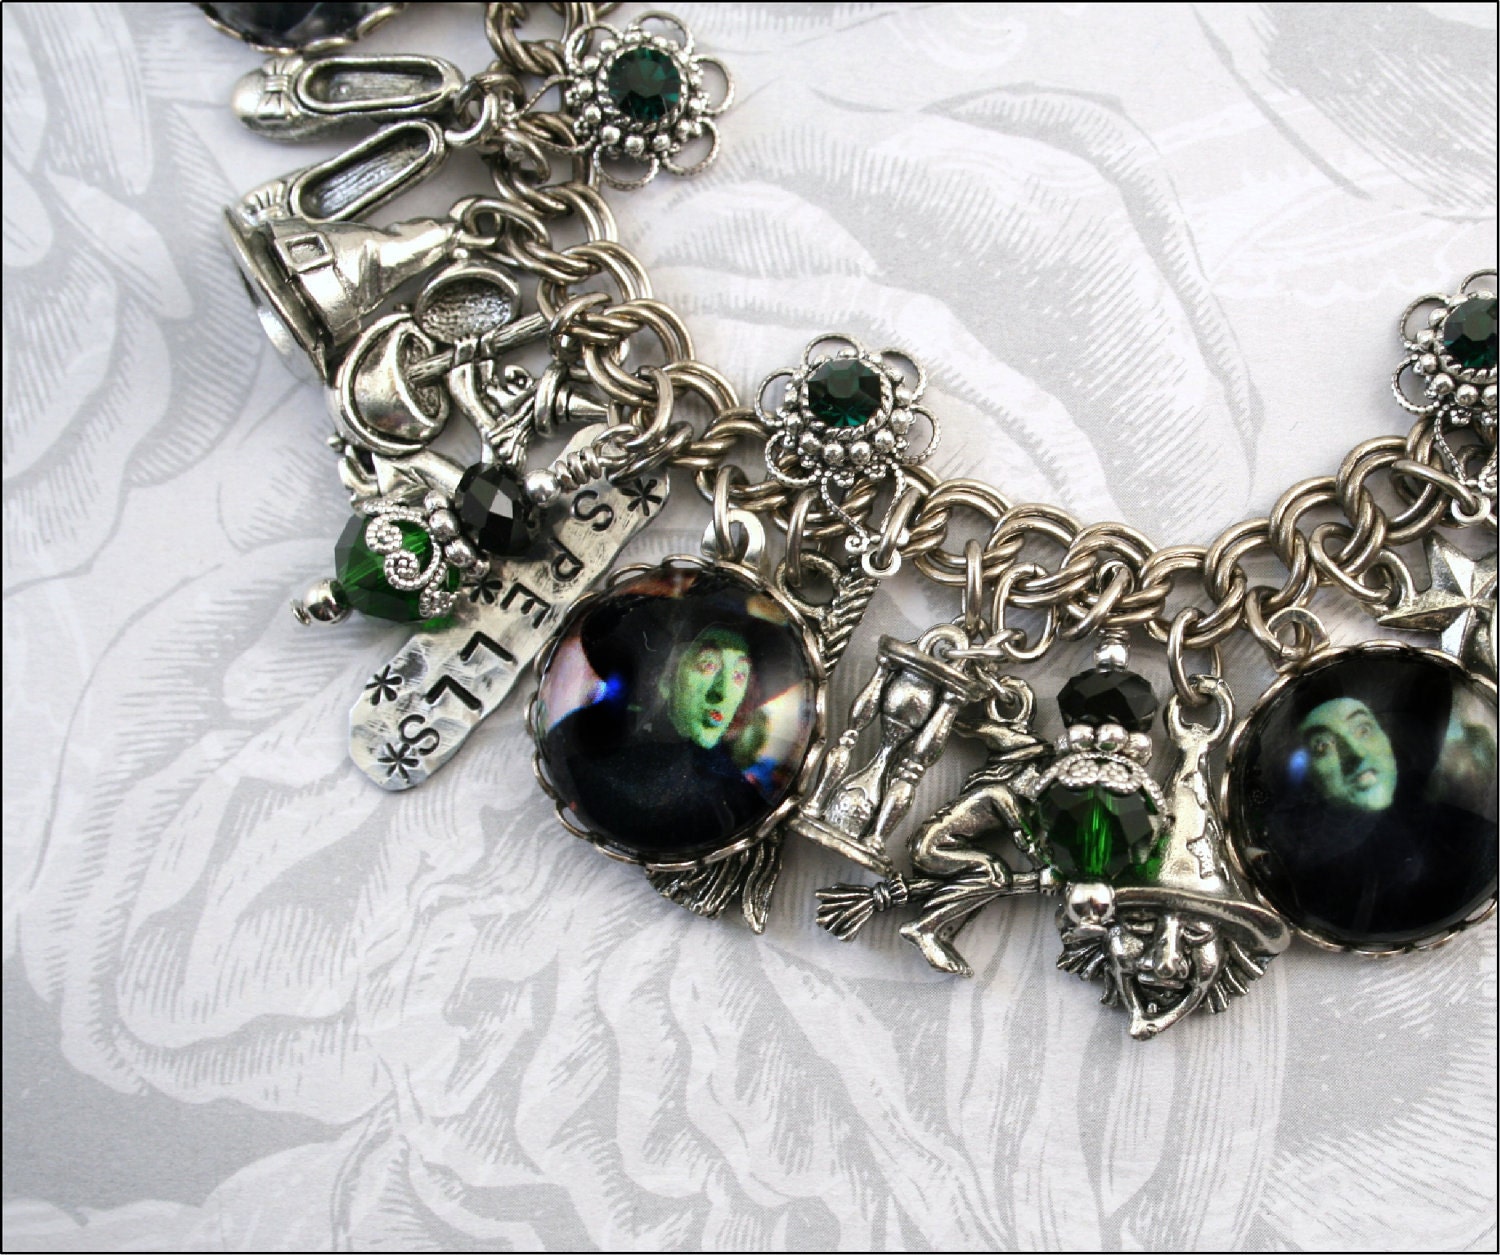 The Wicked Witch of the West, Witches, Halloween, Vintage Inspired Charm Bracelet